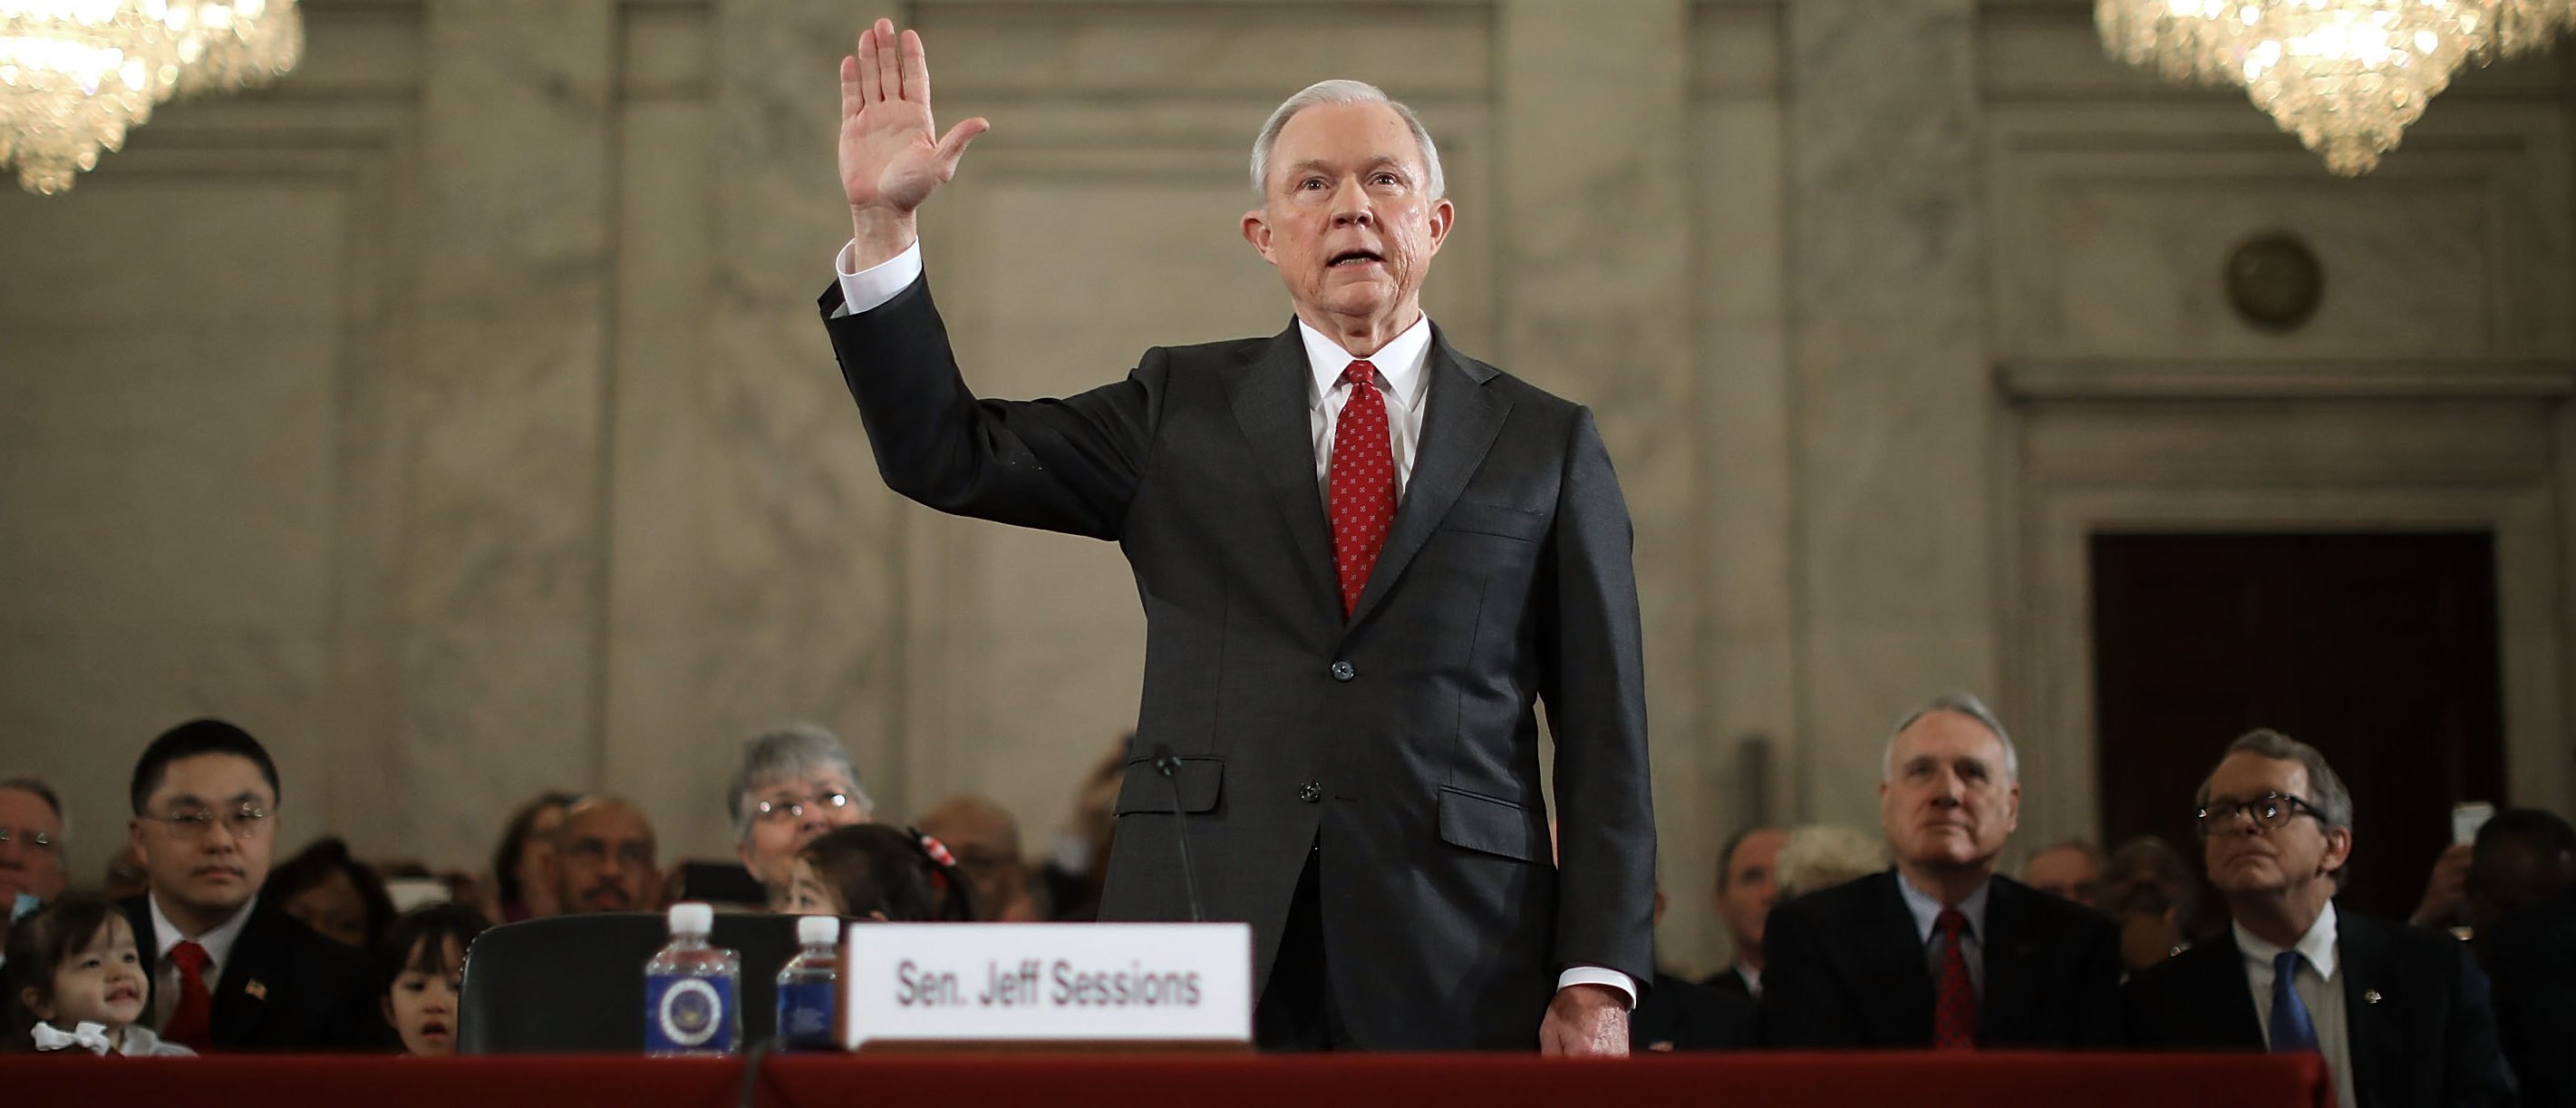 WASHINGTON, DC - JANUARY 10: Sen. Jeff Sessions (R-AL) is sworn in before the Senate Judiciary Committee during his confirmation hearing to be the U.S. attorney general January 10, 2017 in Washington, DC. Sessions was one of the first members of Congress to endorse and support President-elect Donald Trump, who nominated him for Attorney General. (Photo by Chip Somodevilla/Getty Images)